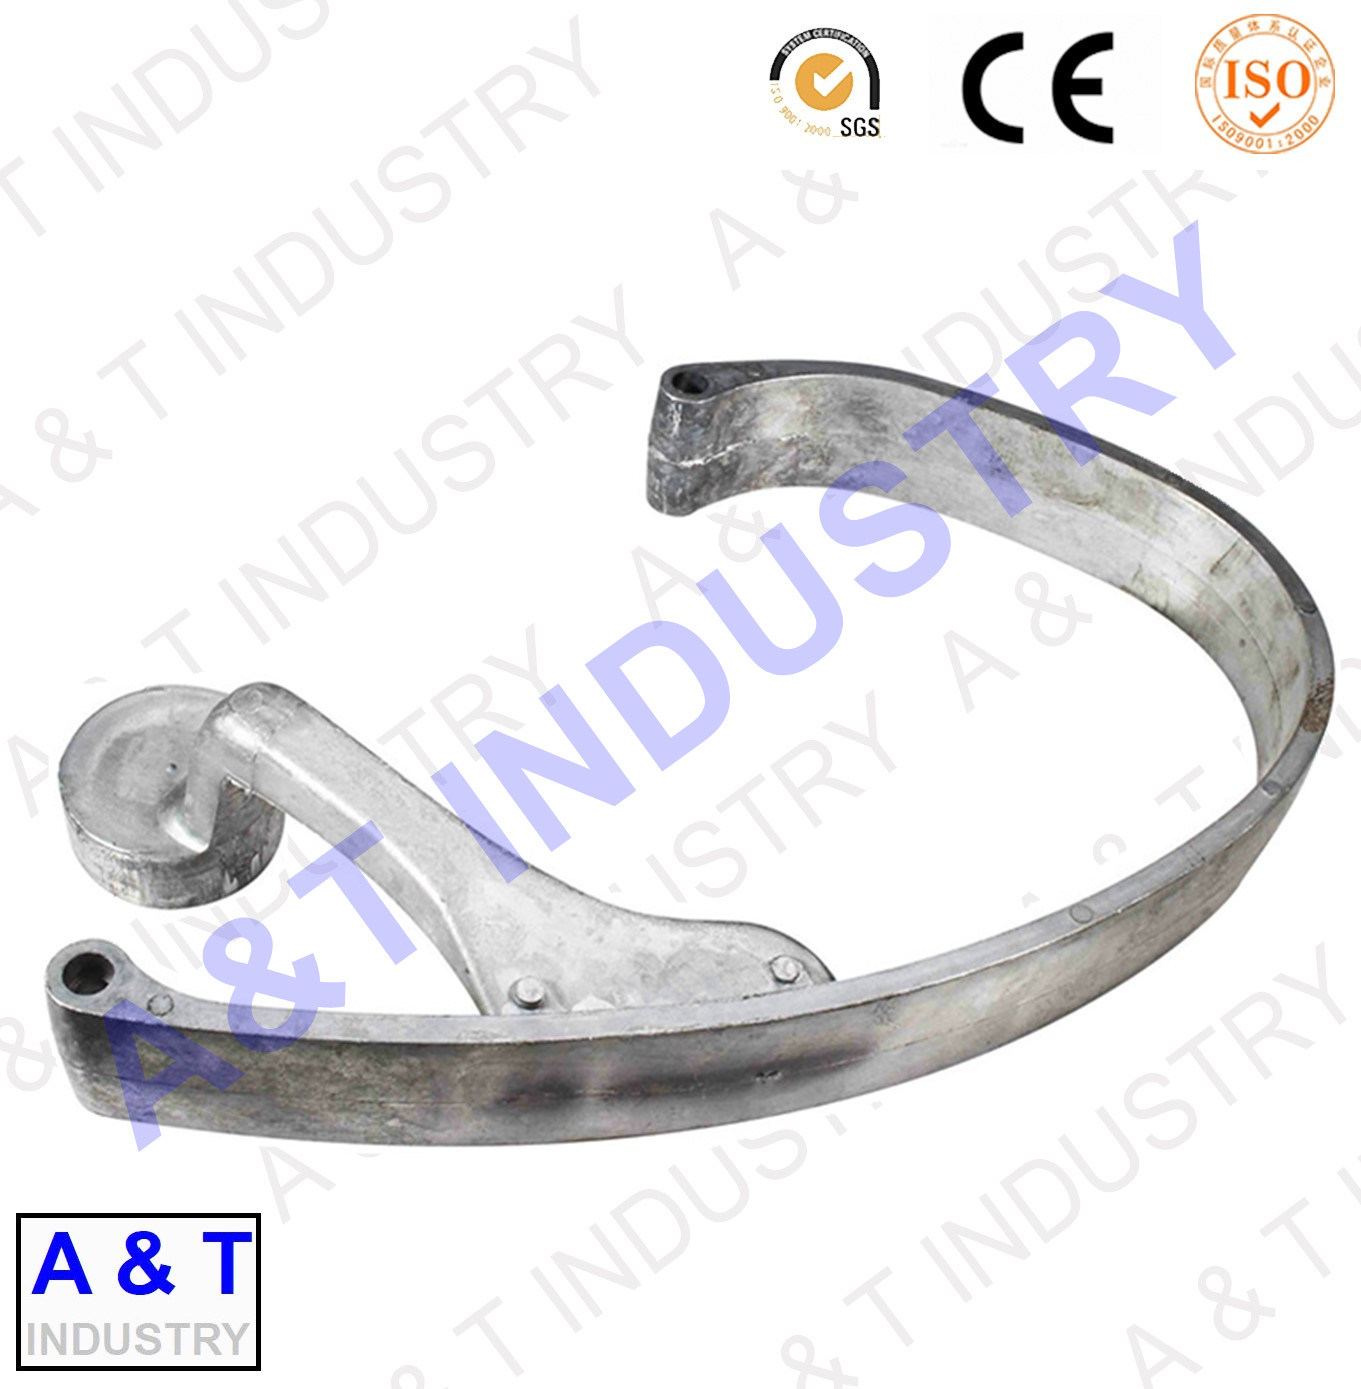 Stainless Steel Precision Casting/Precision Casting Parts